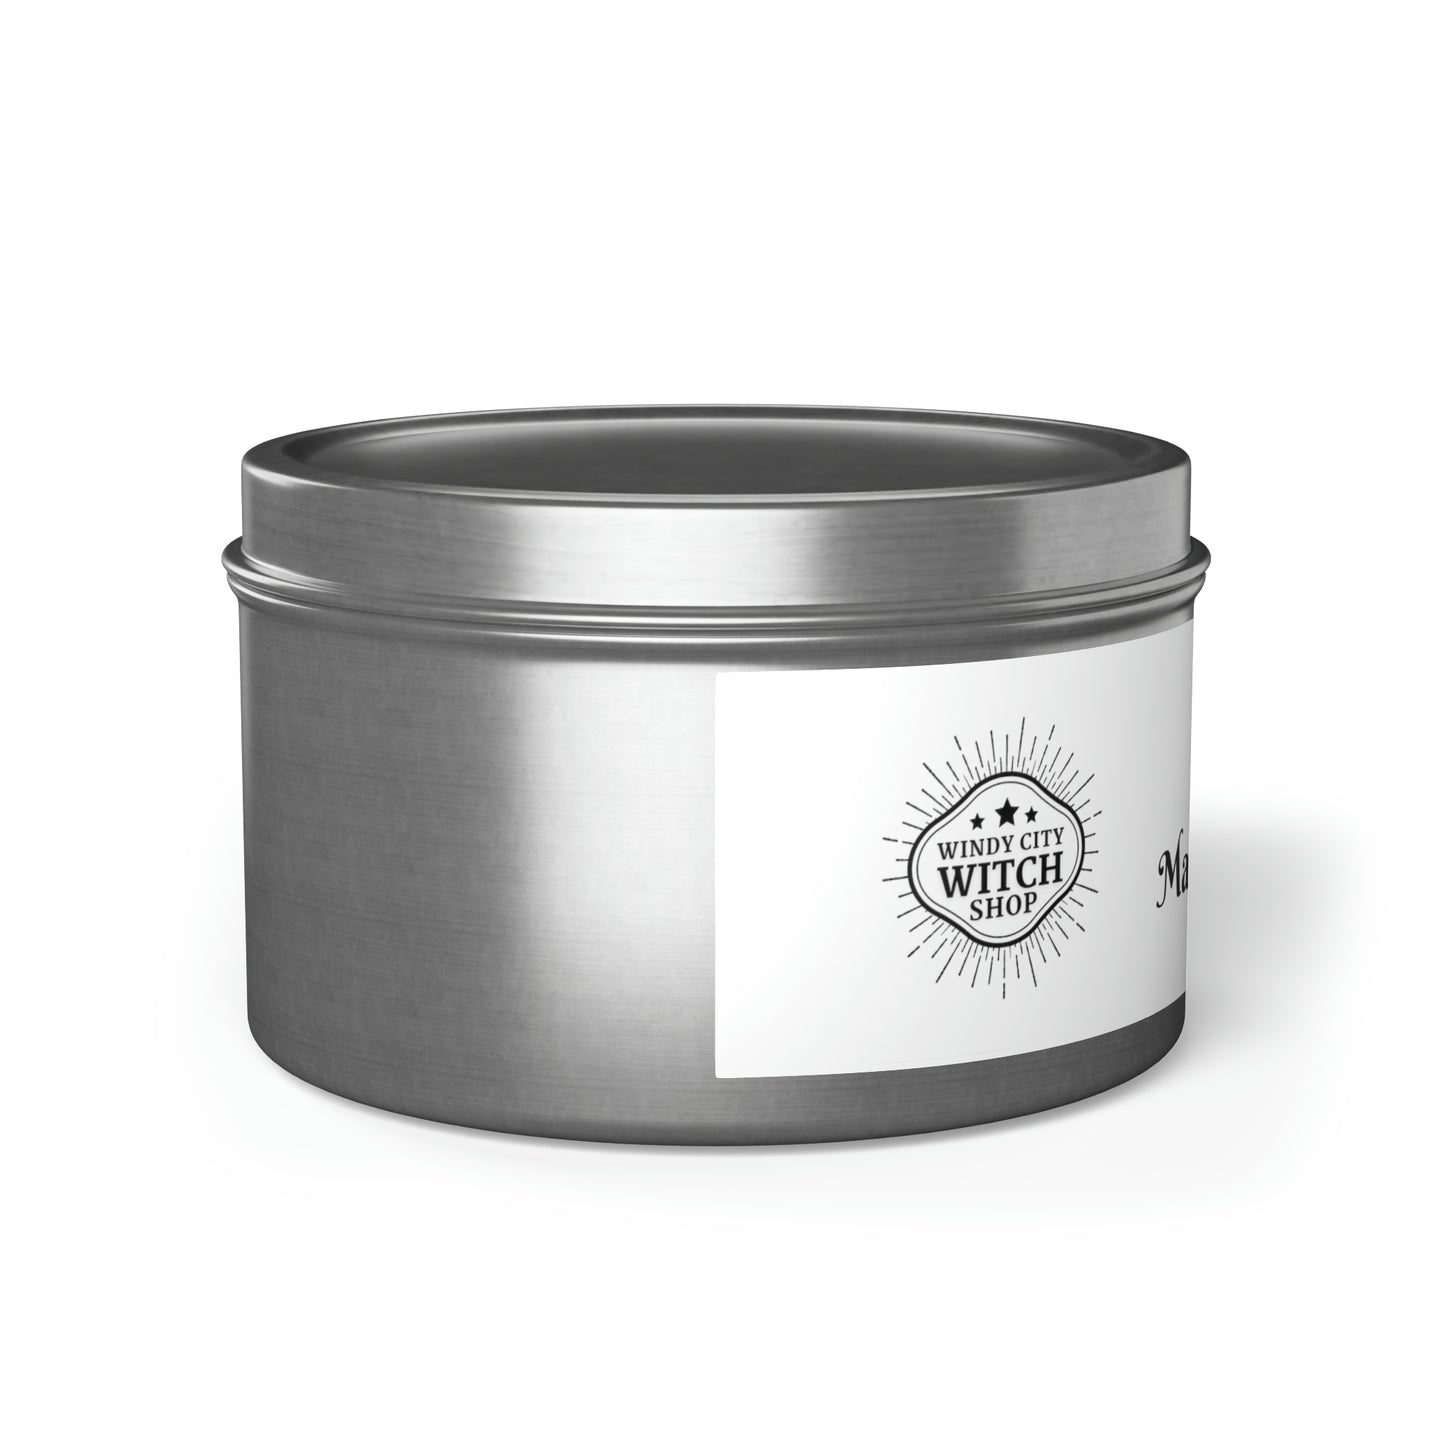 Mango Coconut - tin candle, scented